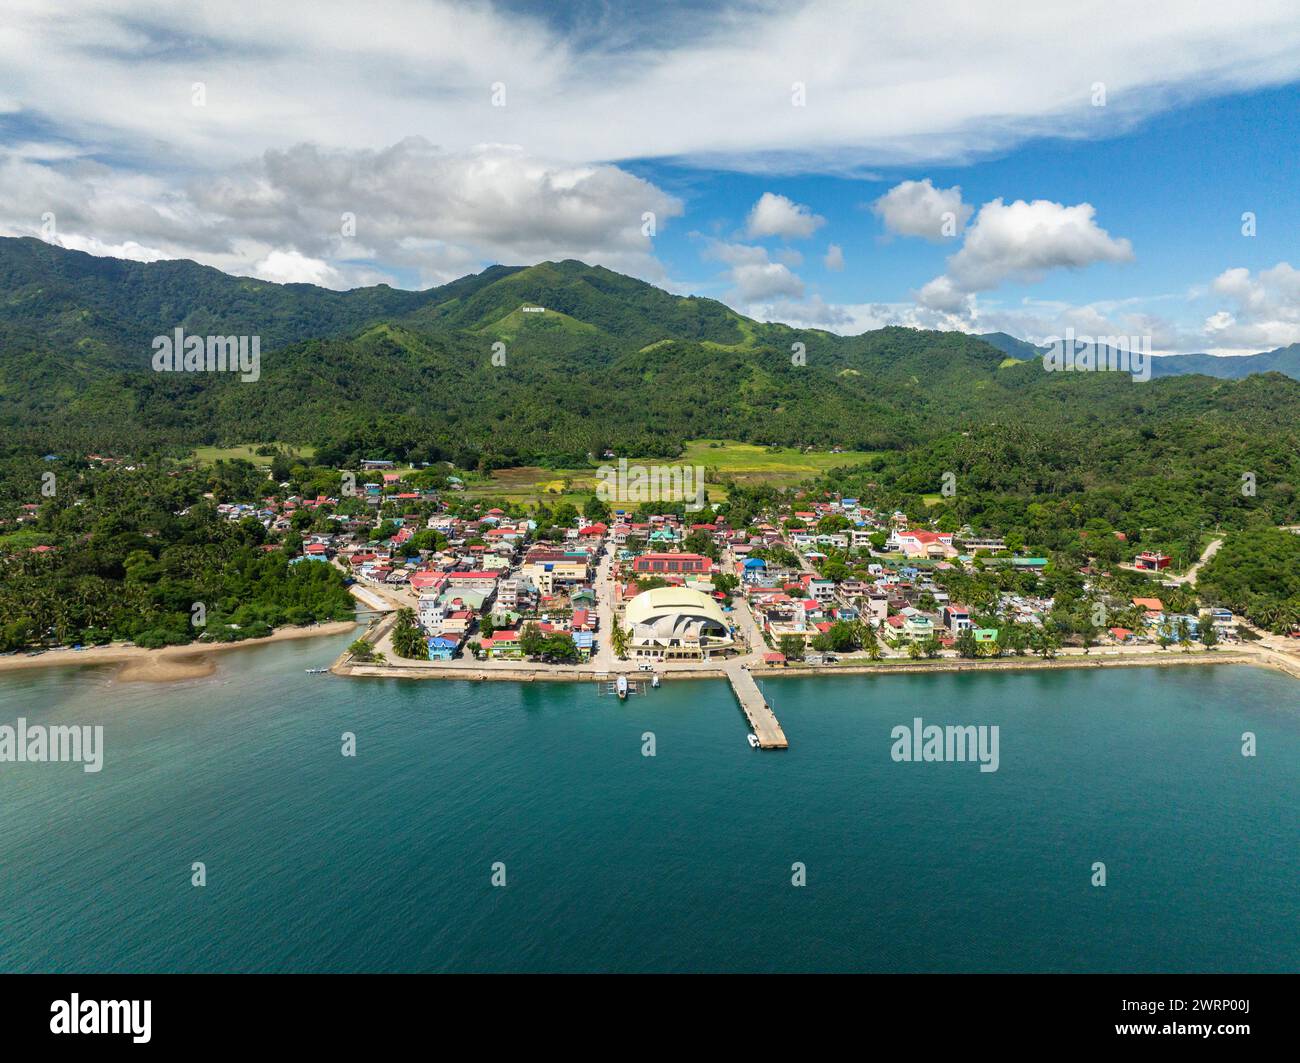 Beautiful landscape of town city in mountainside and coastal area in San Agustin, Romblon. Philippines. Stock Photo